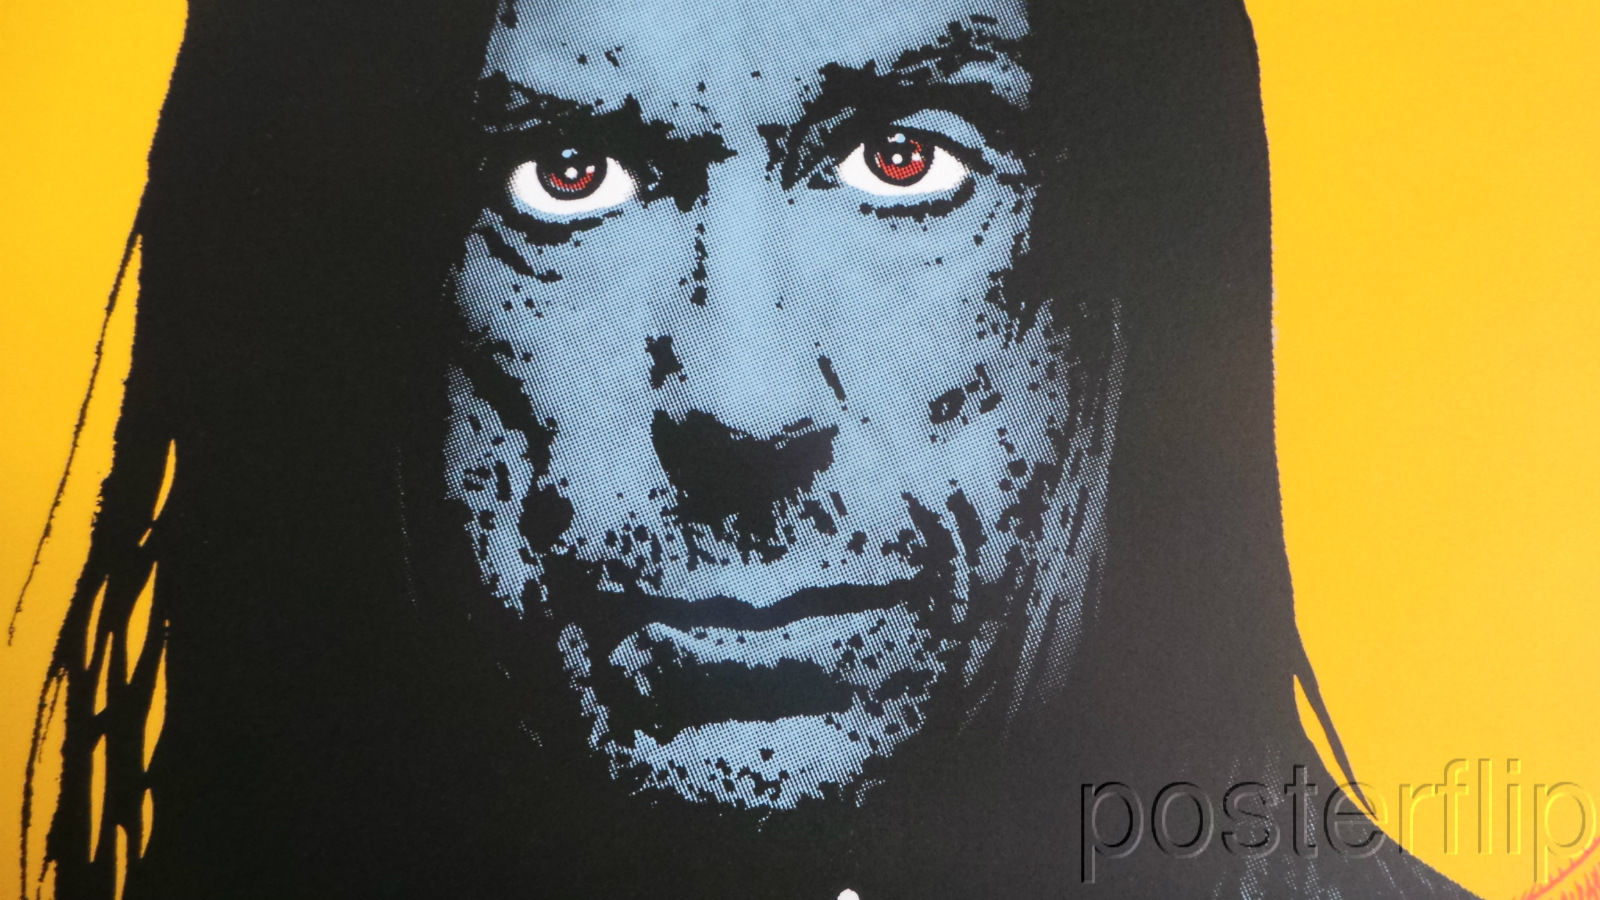 Title:  Iggy Pop #3 (Pop Target)  Artist:  Emek  Edition:  xx/100  Type:  Screen print poster  Size: 18" x 24"  Notes:  Released in 2016 by Emek Studios Inc. in a limited quantity of 100, signed and numbered by the artist.  Print is stored flat in very good condition. Following purchase, prints are rolled in archival paper and shipped with bubble wrap in sturdy cardboard tubes.  Check out our other listings for more hard-to-find and out-of-print posters.